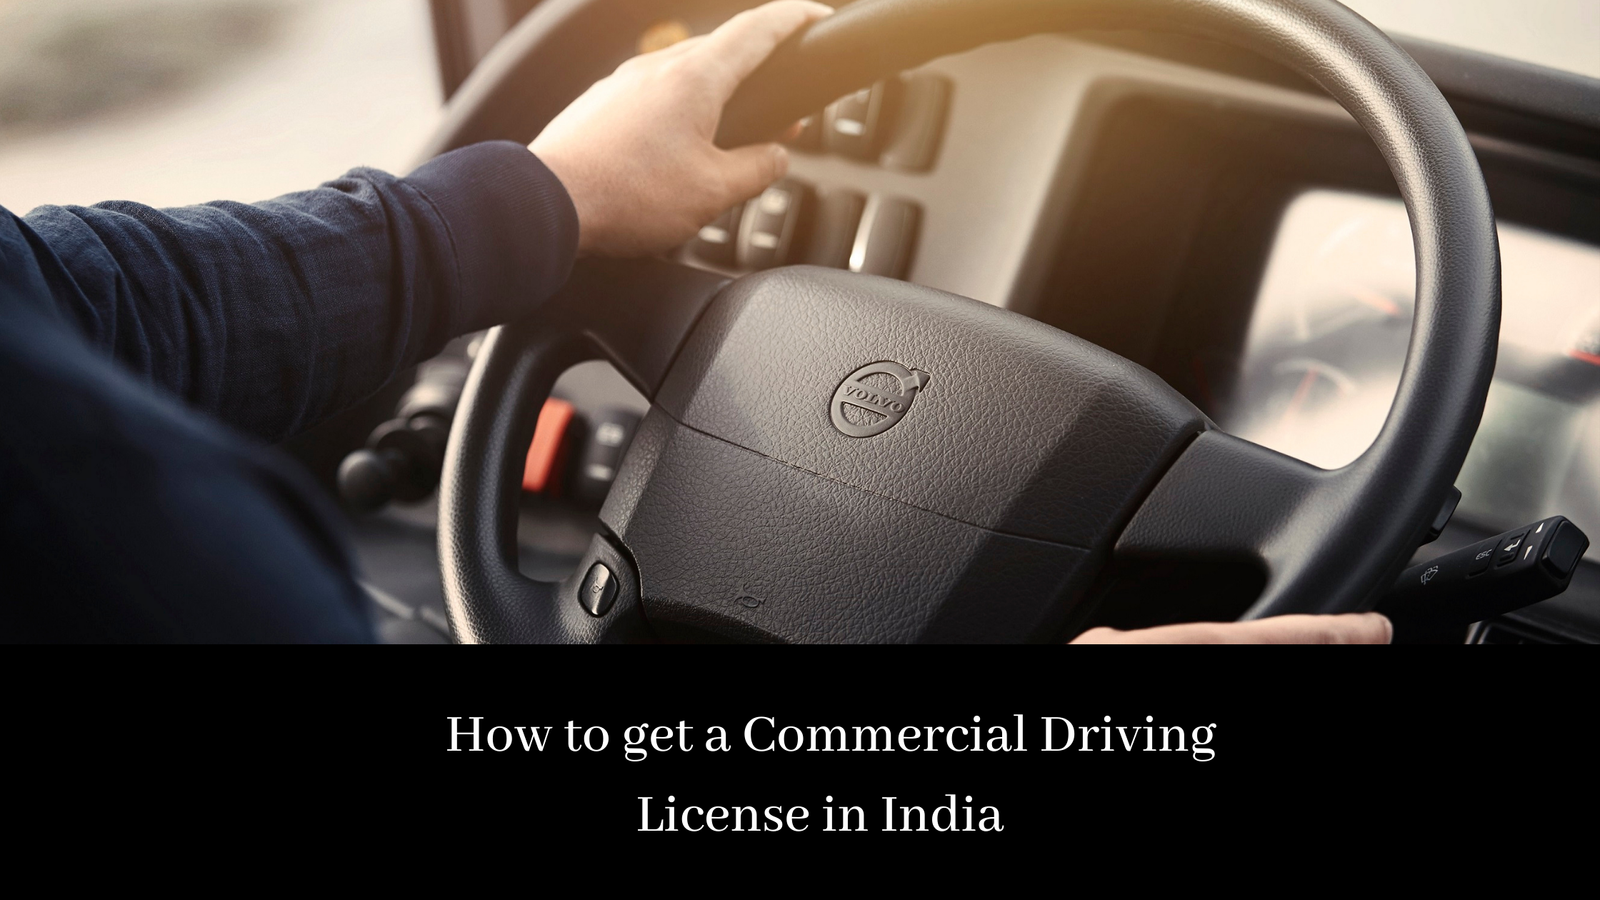 How to get a Commercial Driving License in India